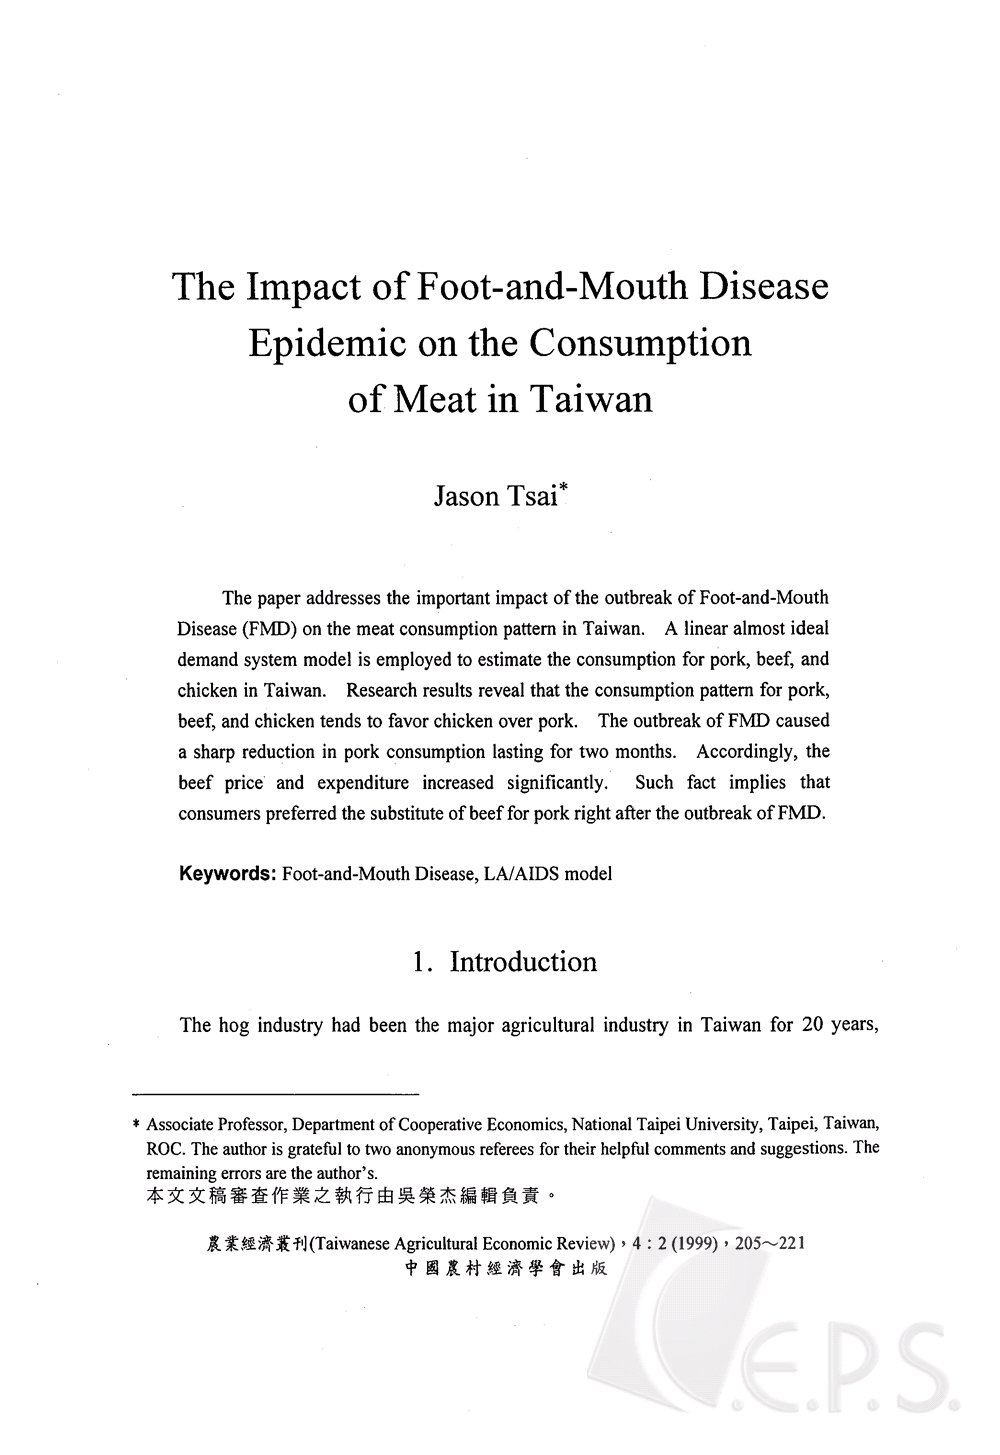 The_Impact_of_Foot-and-Mouth_Disease_Epidemic_on_the_Consumption_of_Meat_in_Taiwan.jpg